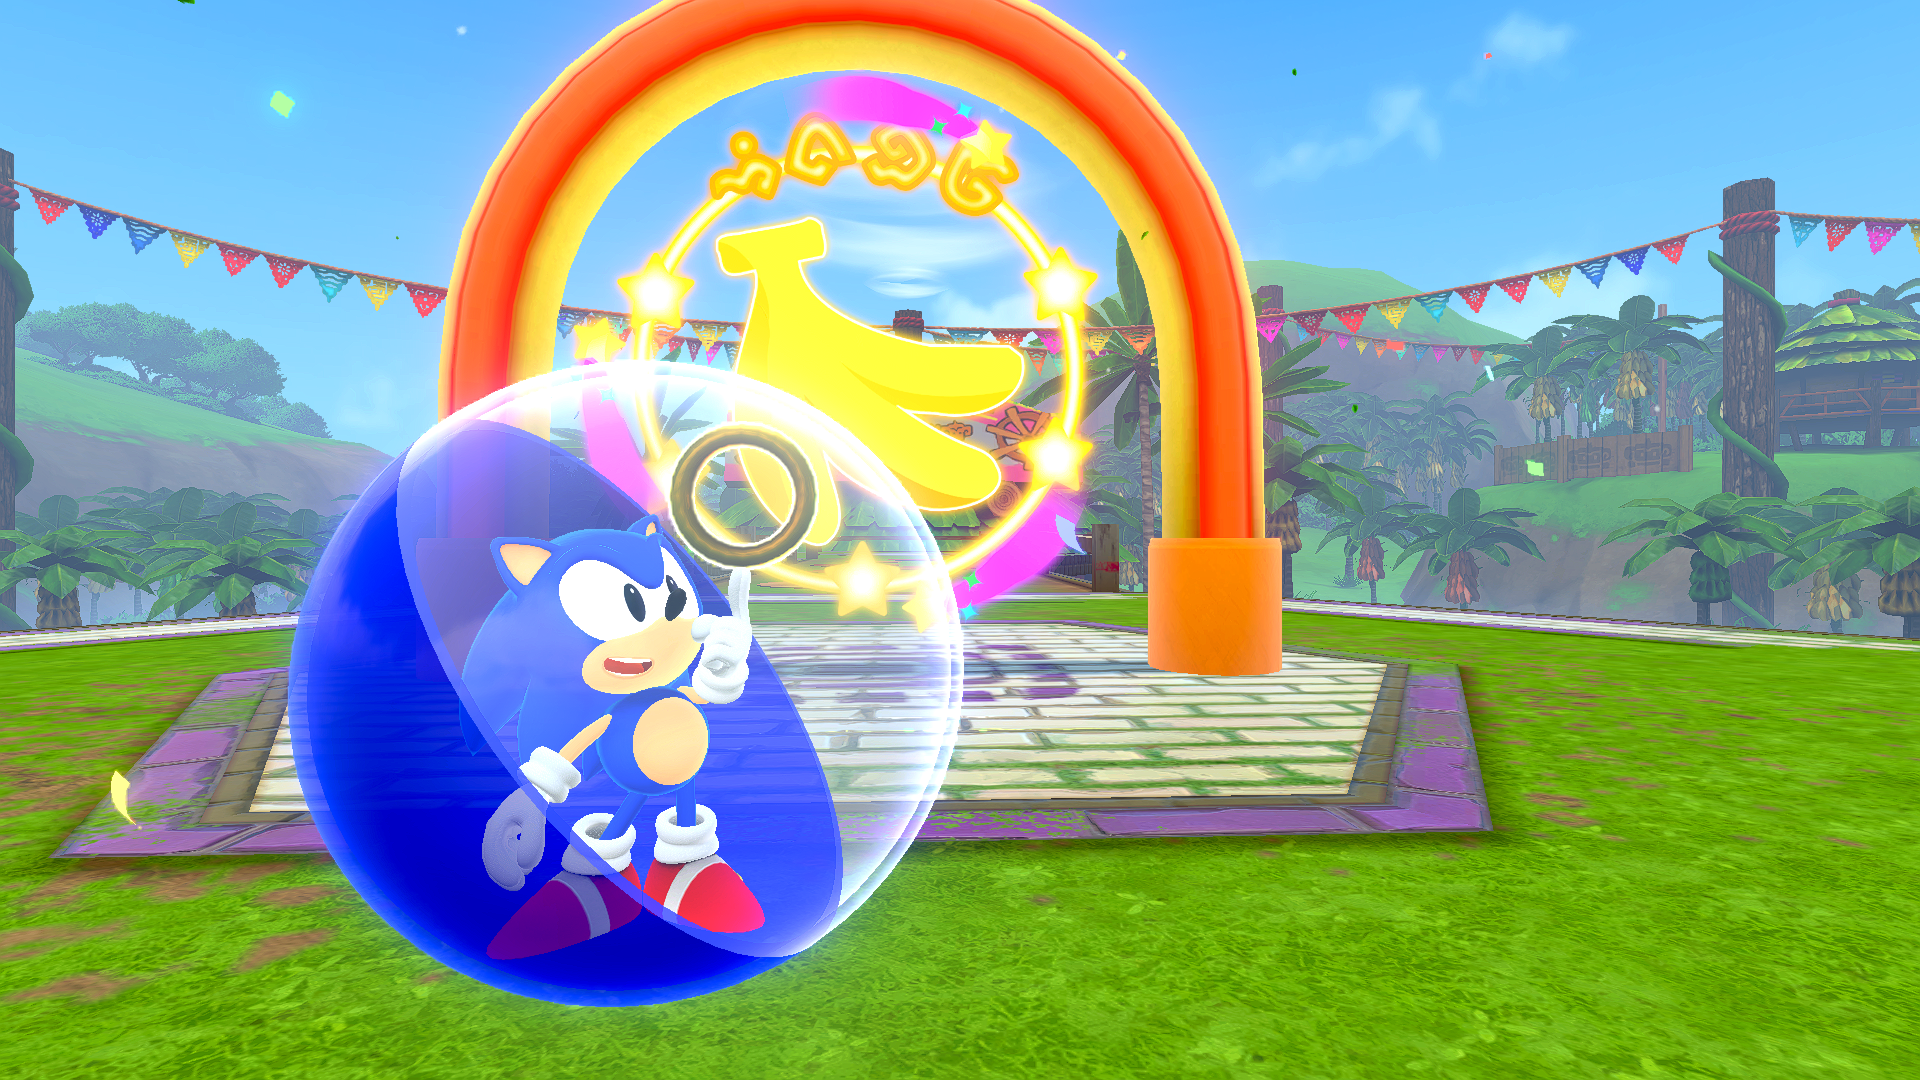 Sonic and Friends appear in Super Monkey Ball Banana Rumble